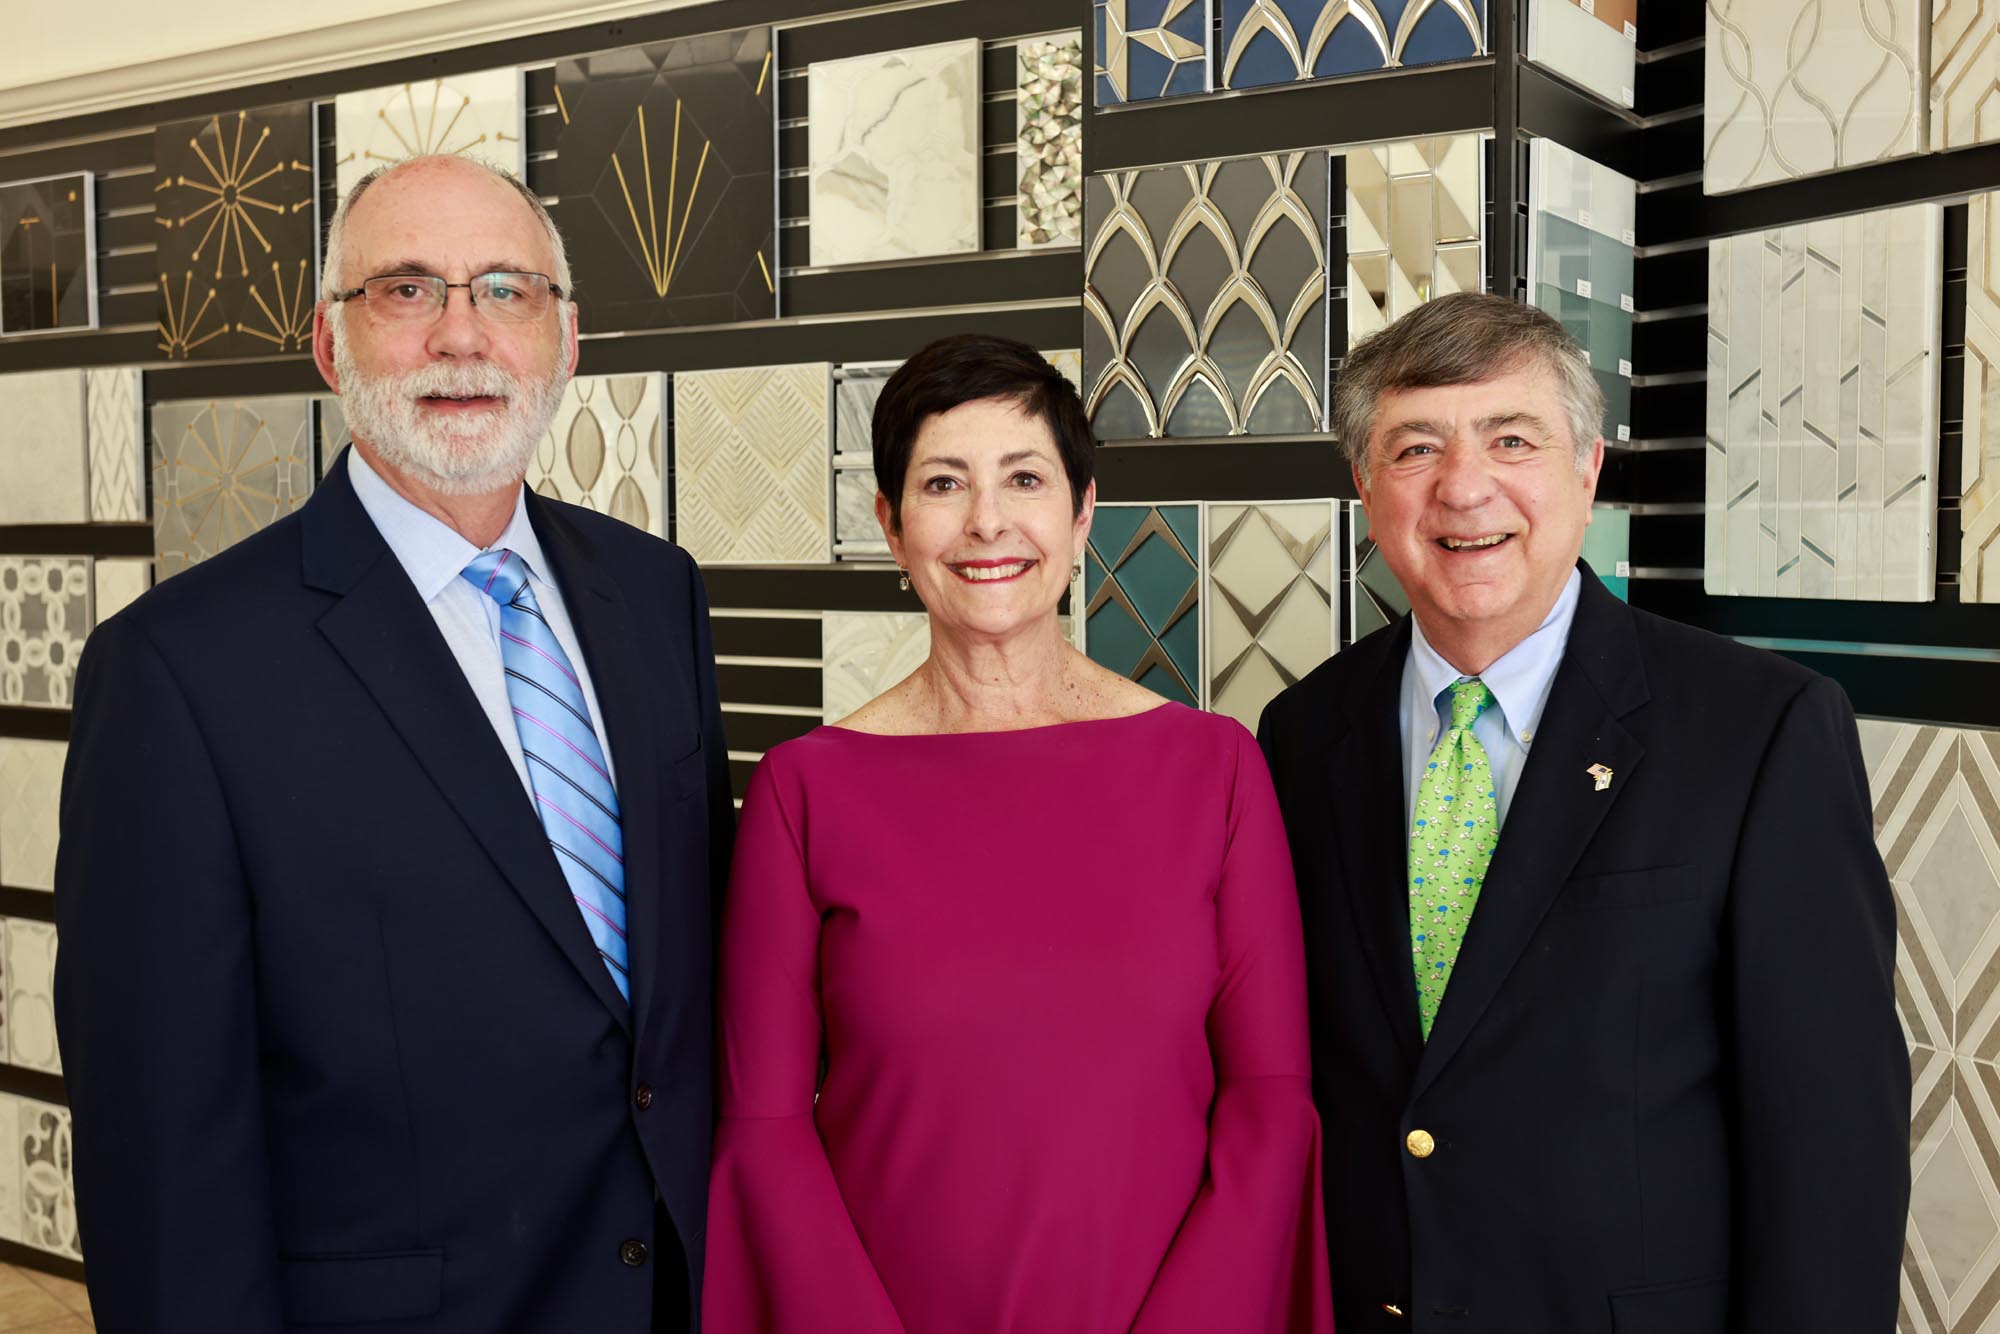 Karl Goldberg, Esther Greenberg, and Henry Goldberg have continued their parents’ legacy by raising their families in Columbia and remaining in the tile business. Karl and Esther run The Tile Center, and Henry owns Palmetto Tile Distributors. 